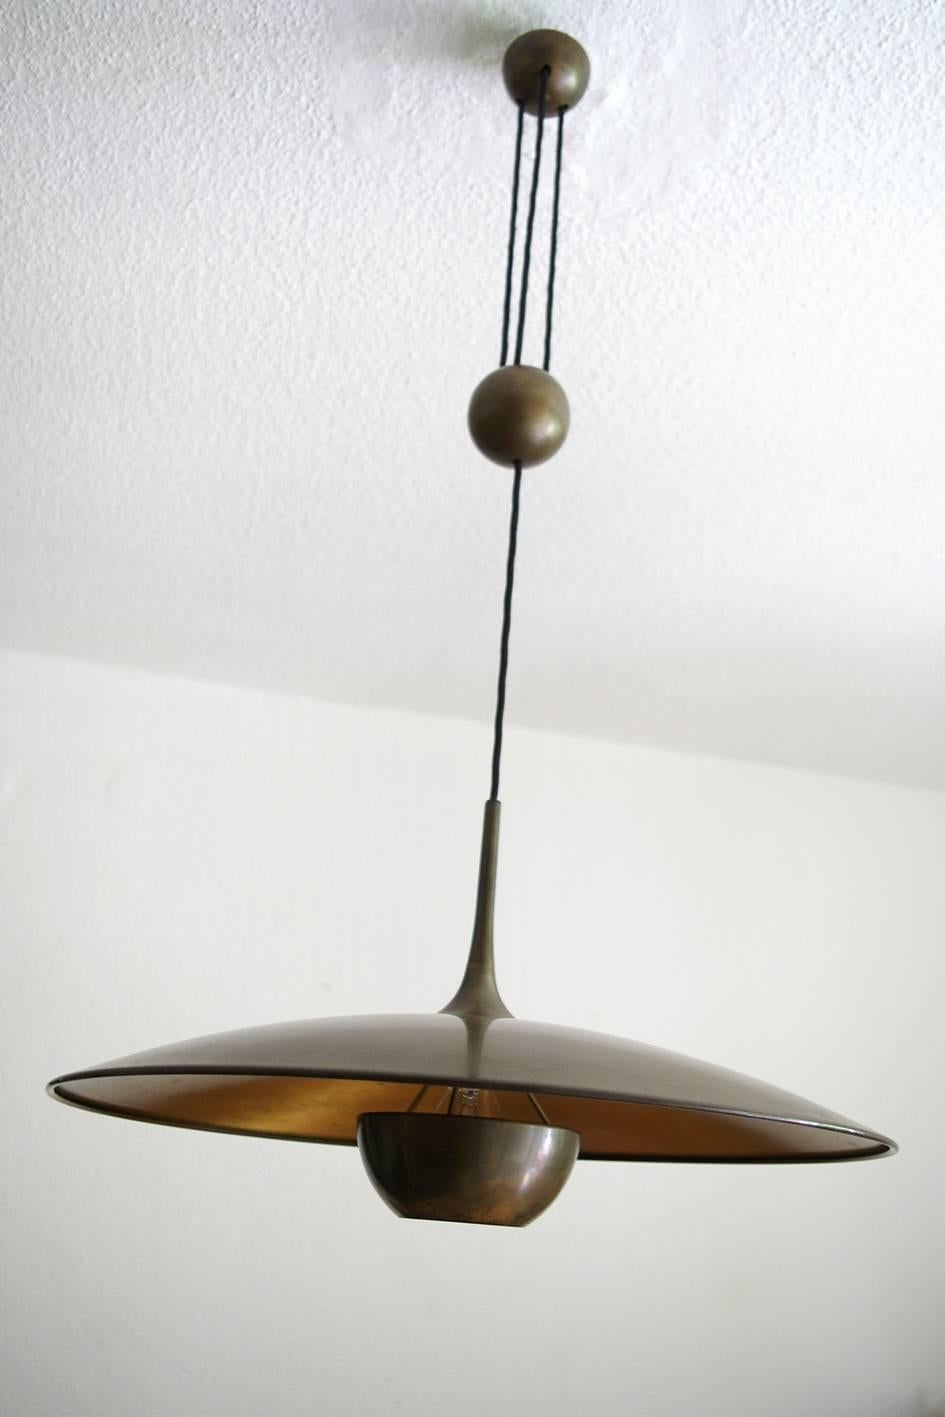 Large adjustable counterweight pendant lamp by Florian Schulz, Germany, 1970s. Very rare matte brushed brass version. Measures: Diameter: 21.65", height (body): 12". Light is adjustable in height from 35" to 67".

Global